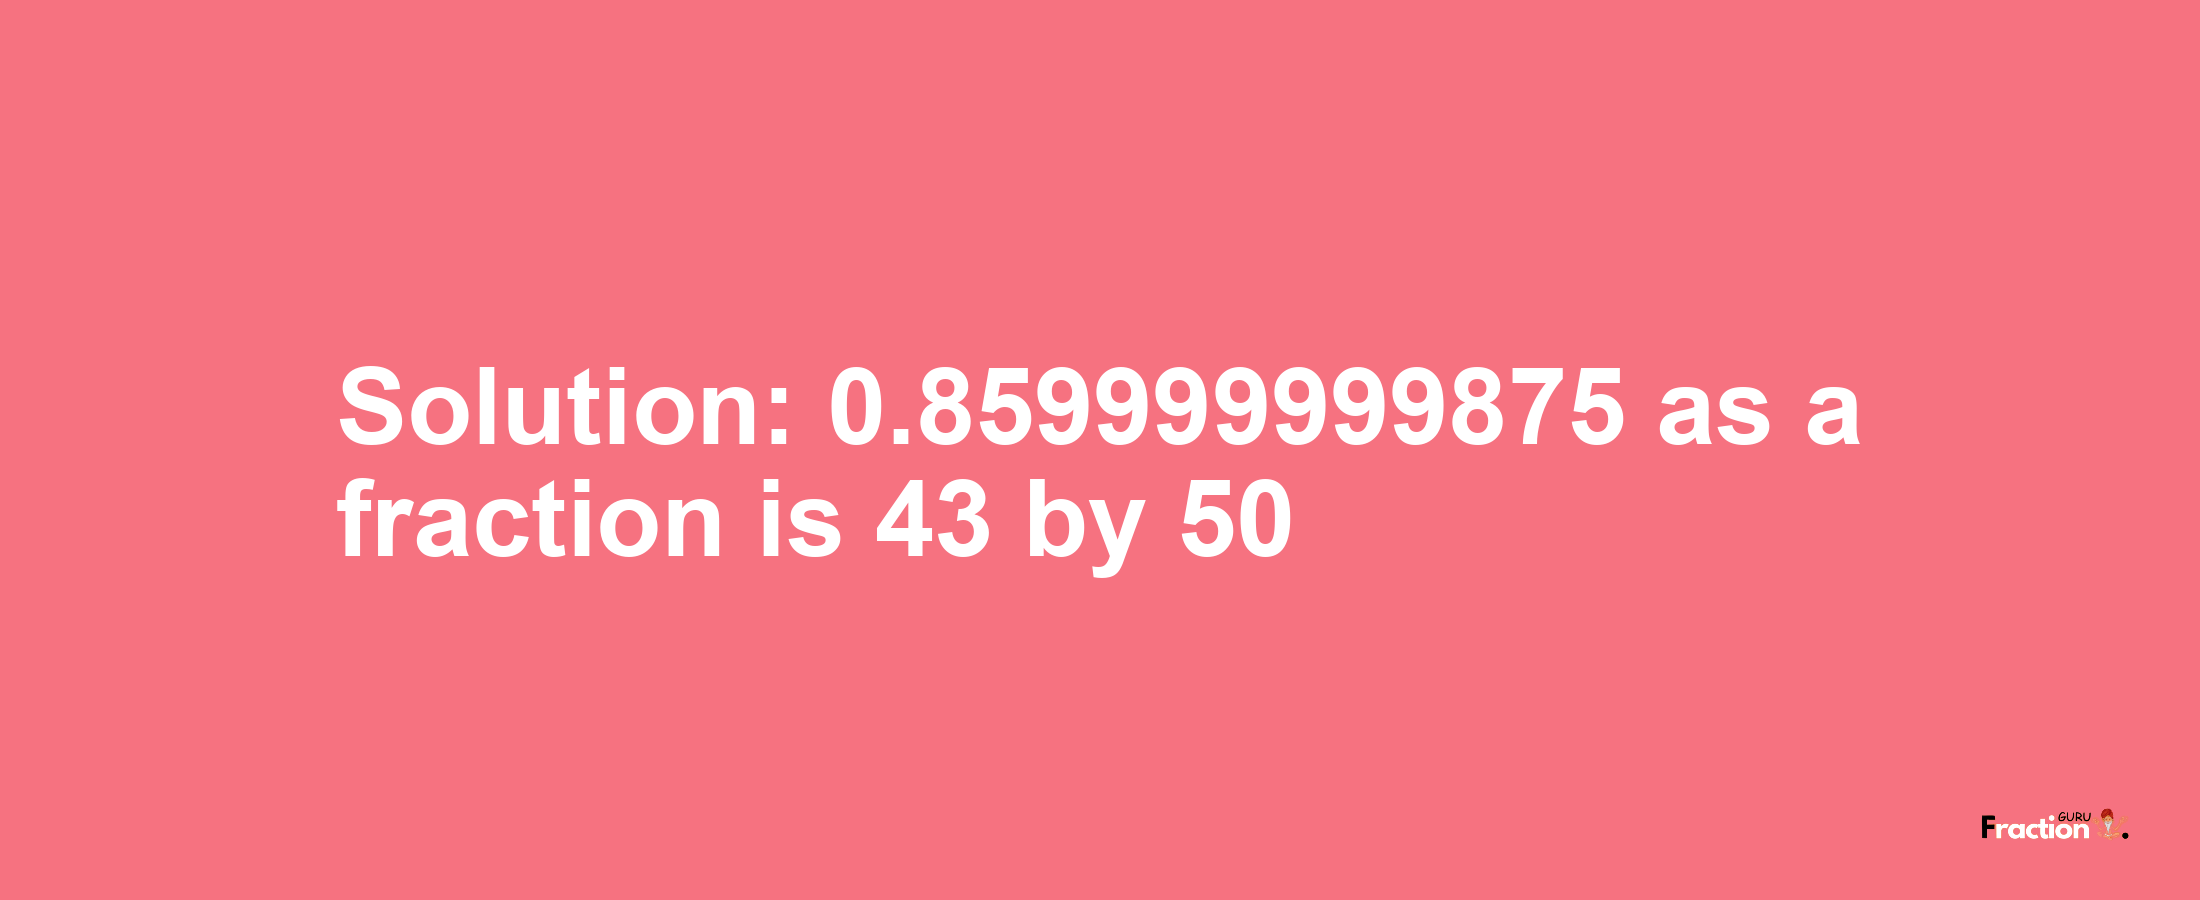 Solution:0.859999999875 as a fraction is 43/50